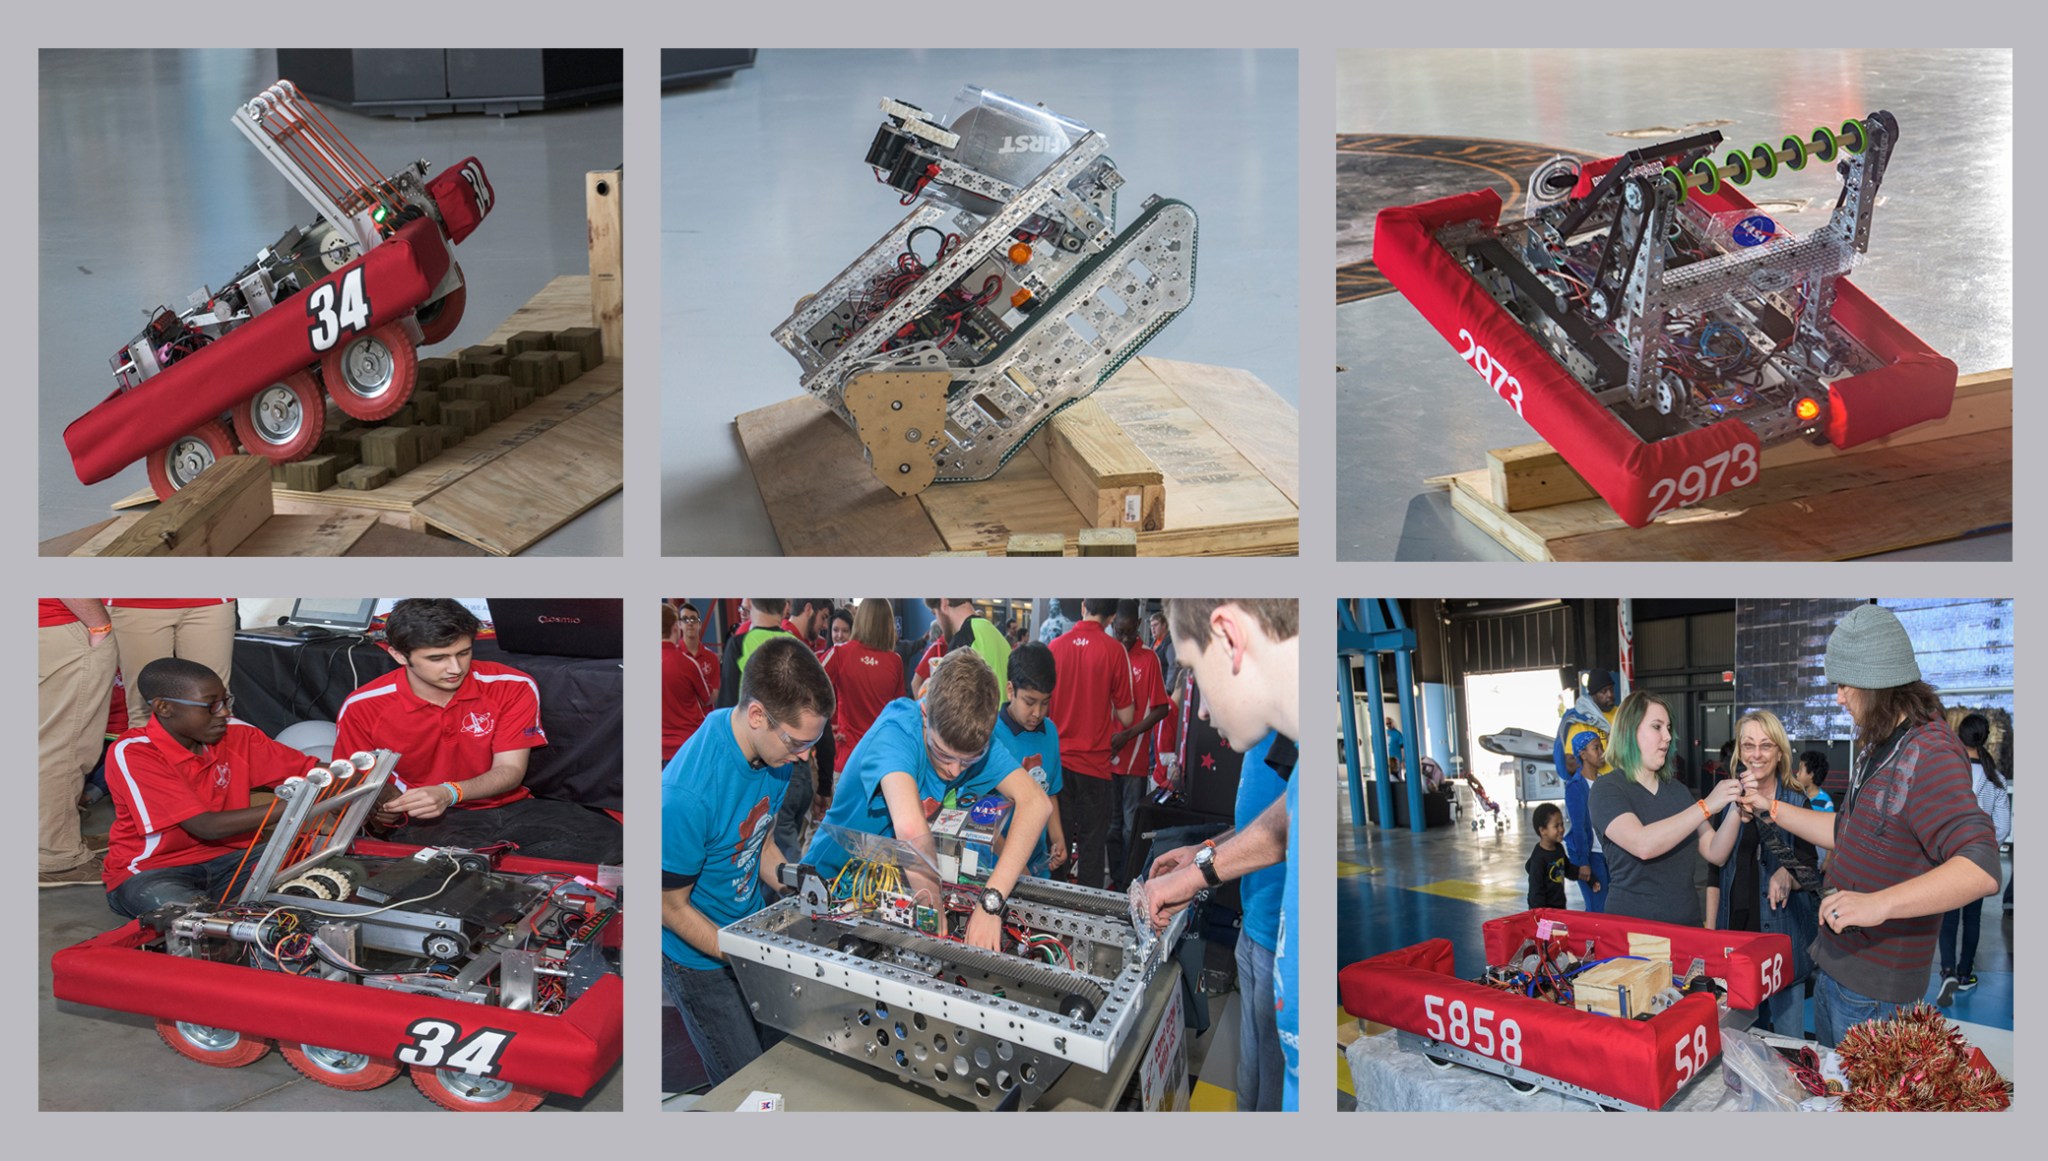 Several FIRST Robotic teams demonstrate their student-built robots during the March 6 “Robots to Rocket City” event.